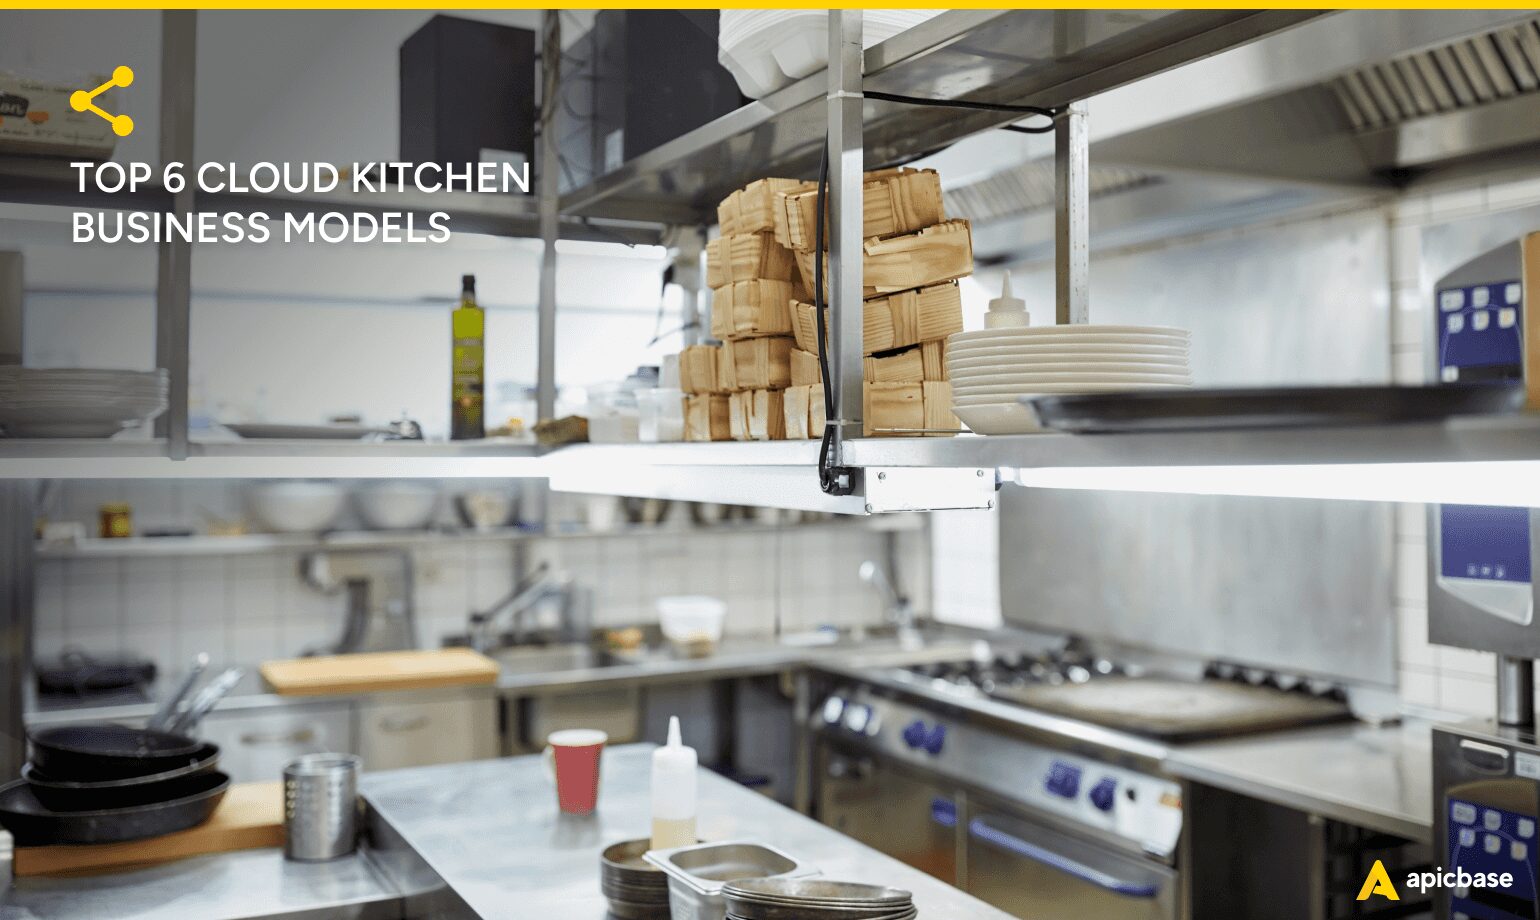 Top 6 Cloud Kitchen Business Models You Need to Know About